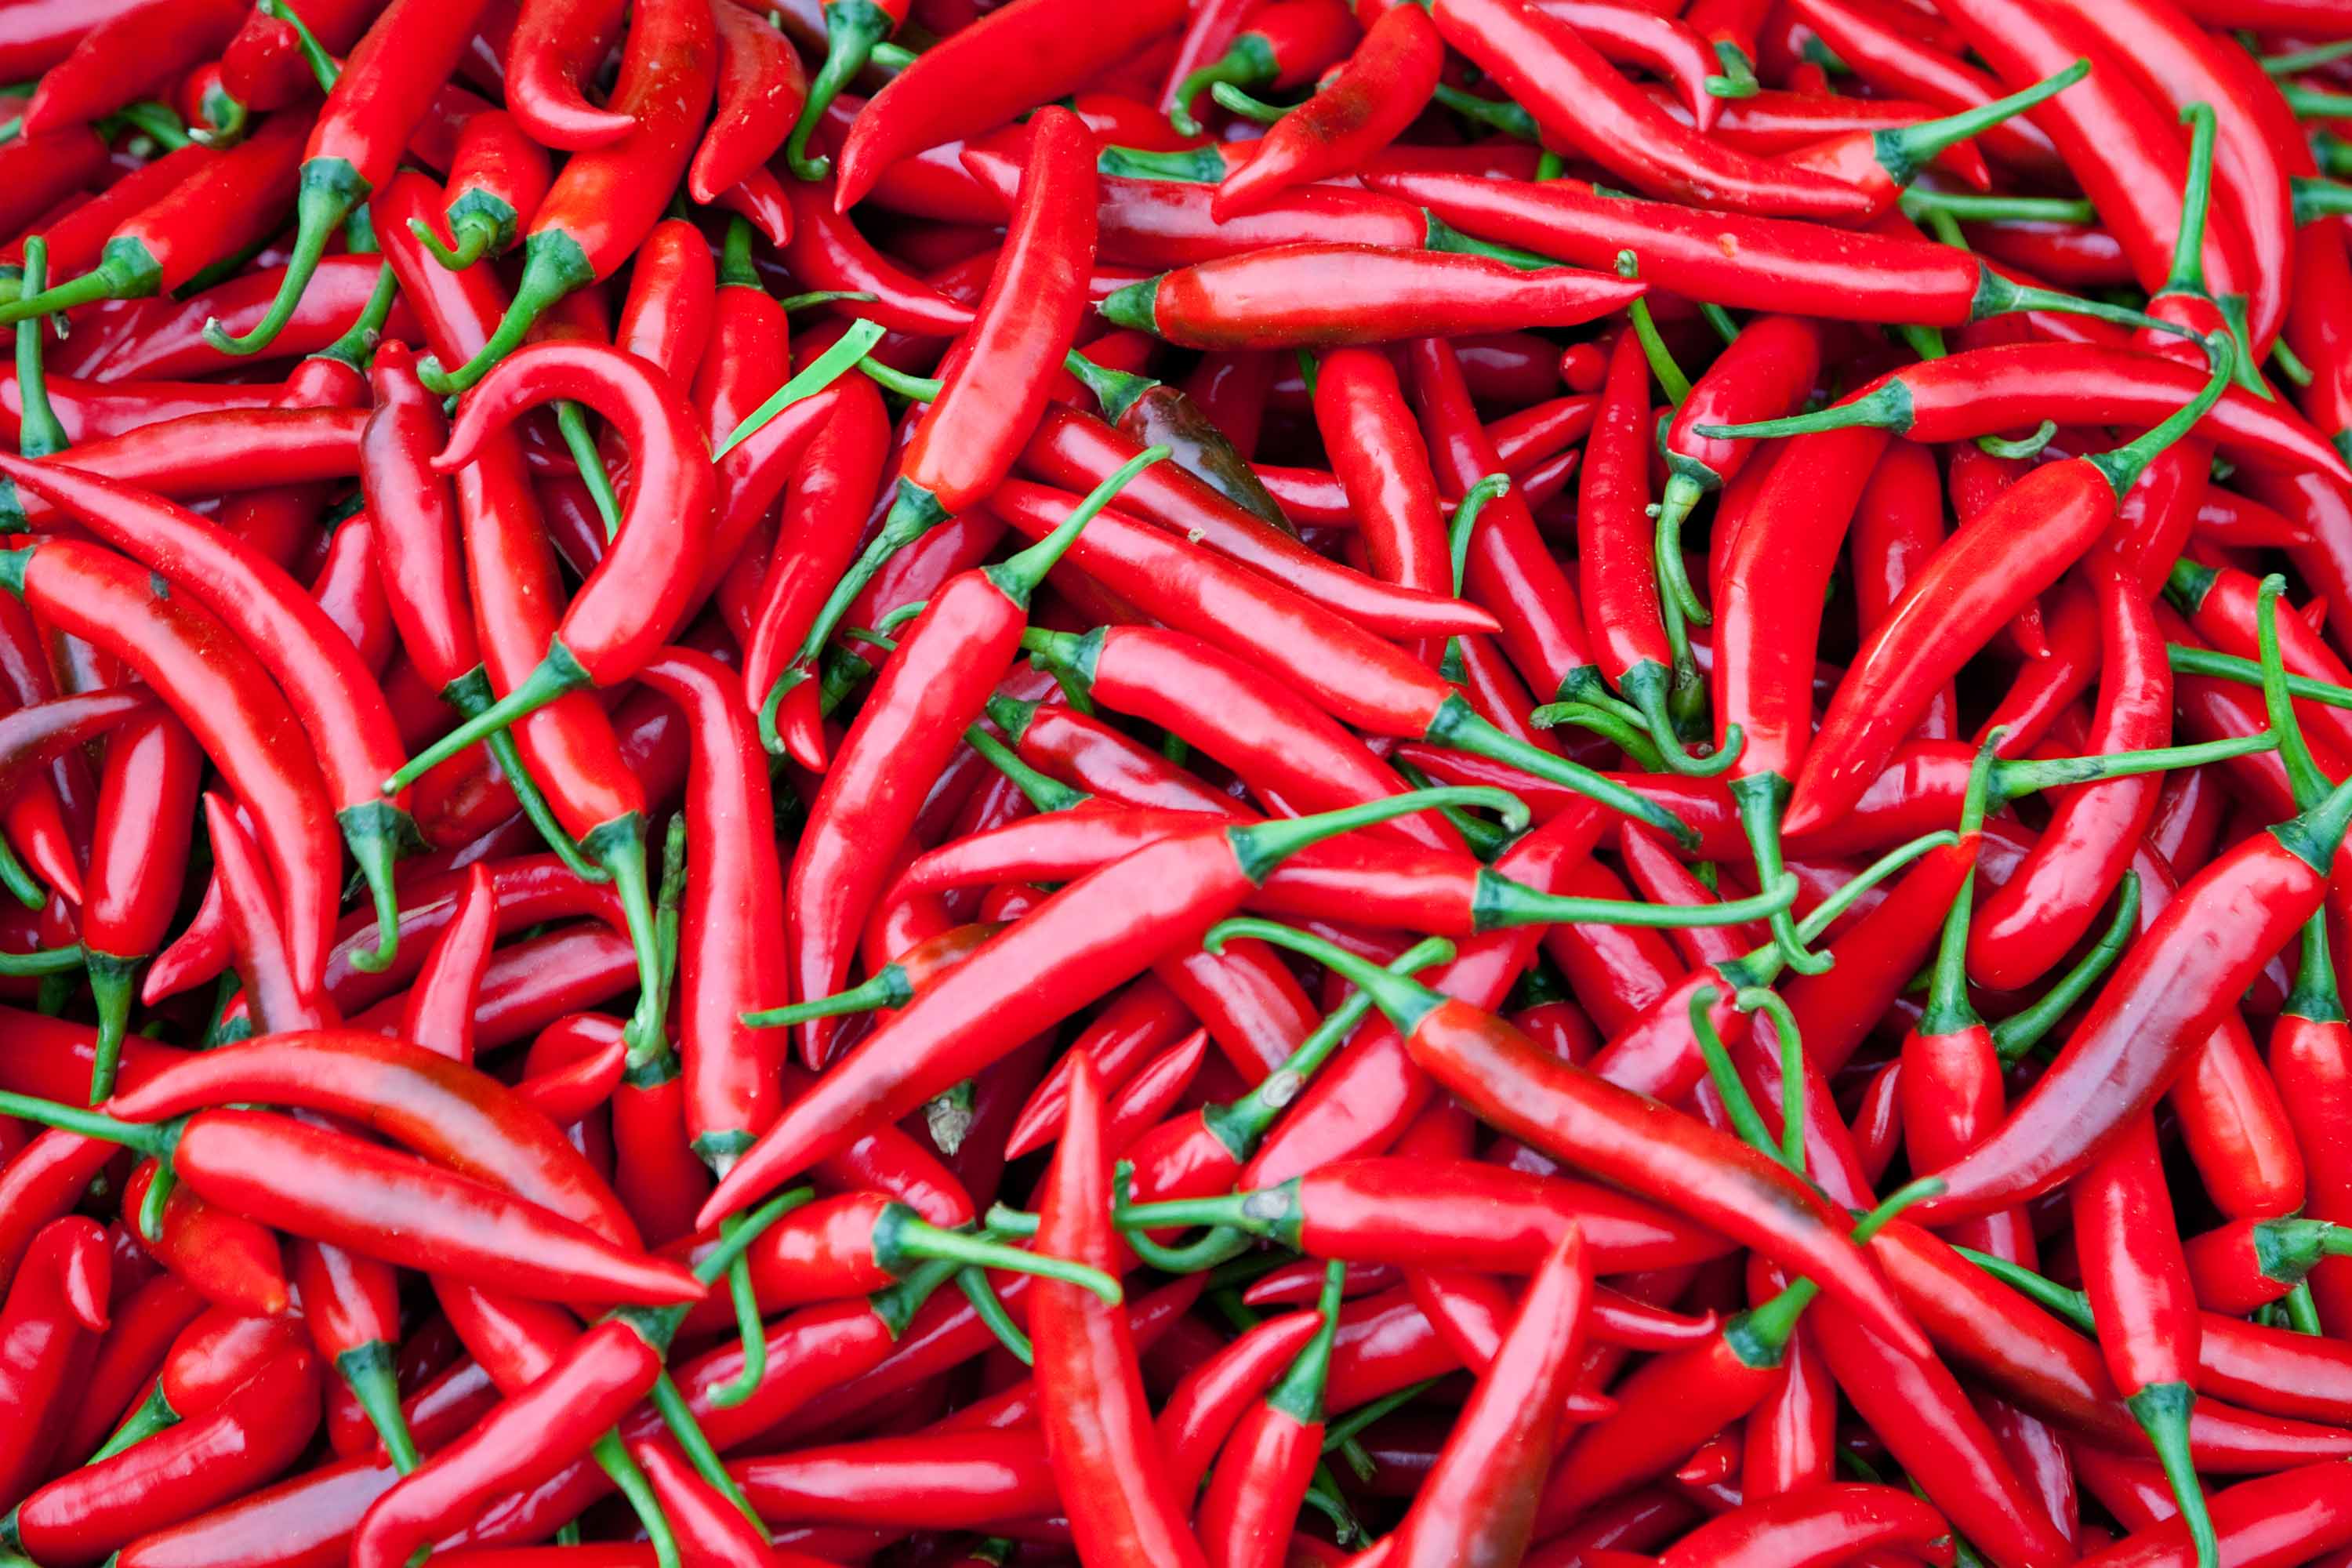 Eating chilies cuts risk of death from heart attack and stroke, study says